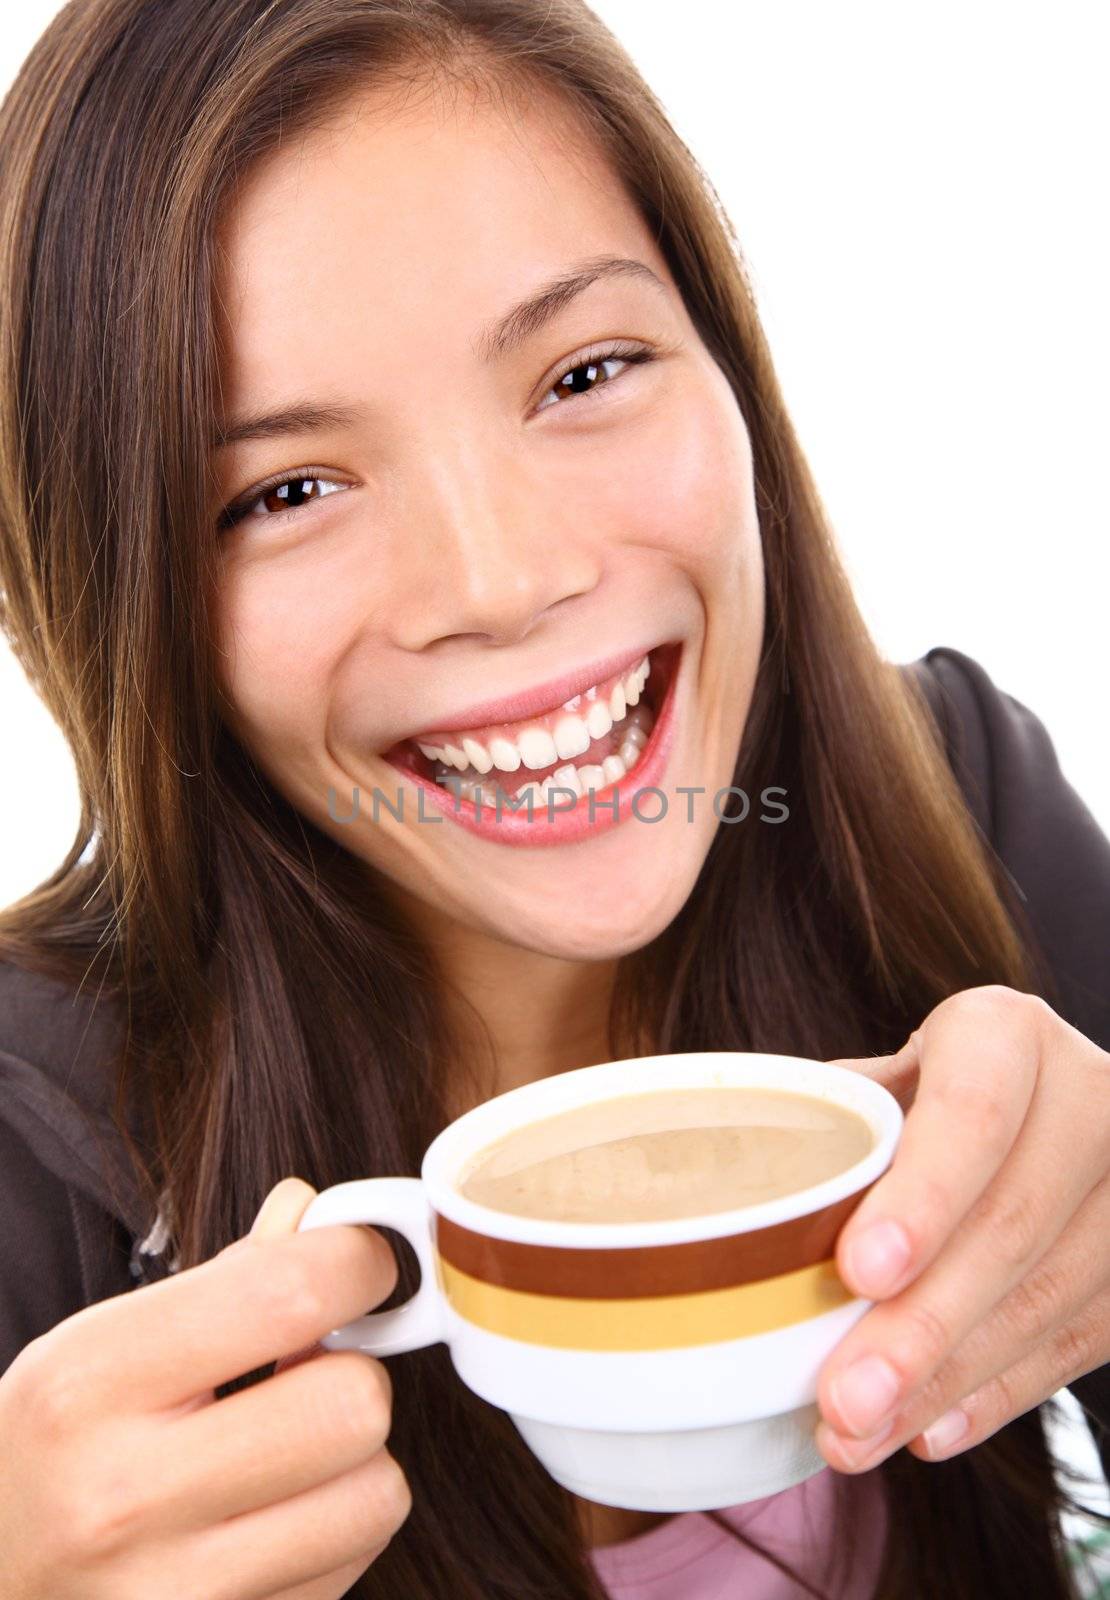 Young woman excited and happy holding her coffee. Isolated on white background.